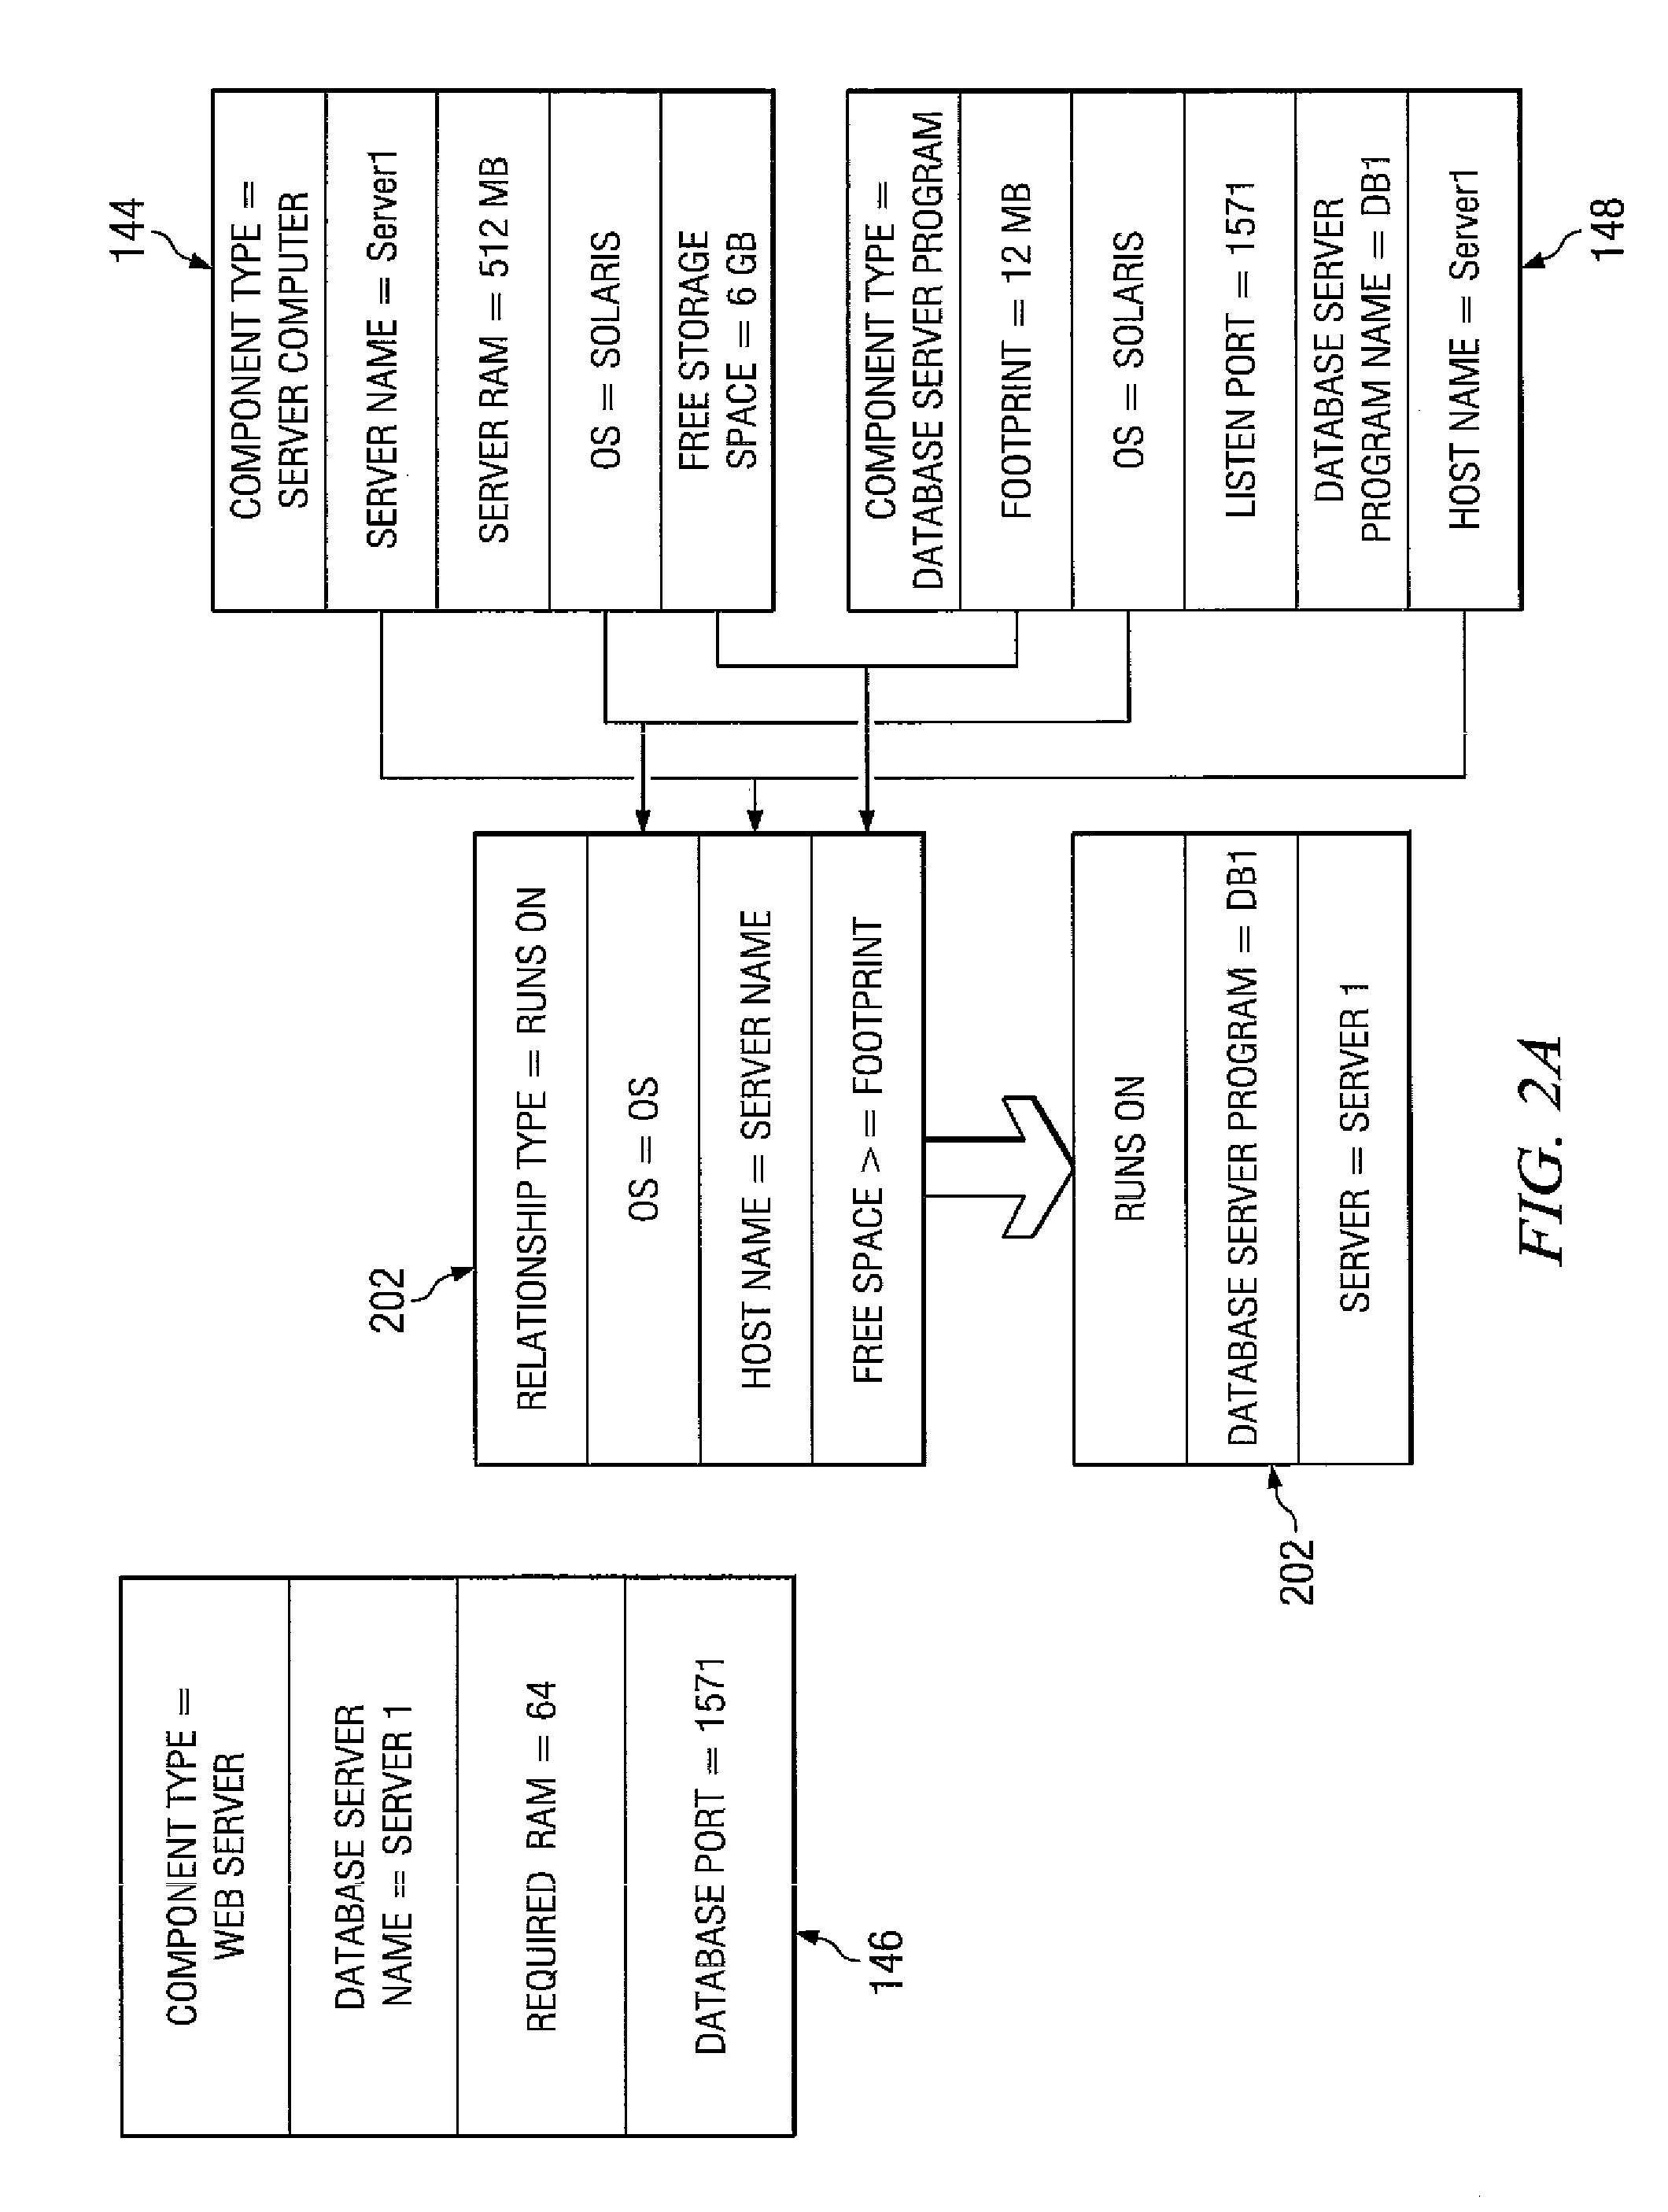 Method and system for discovering relationships